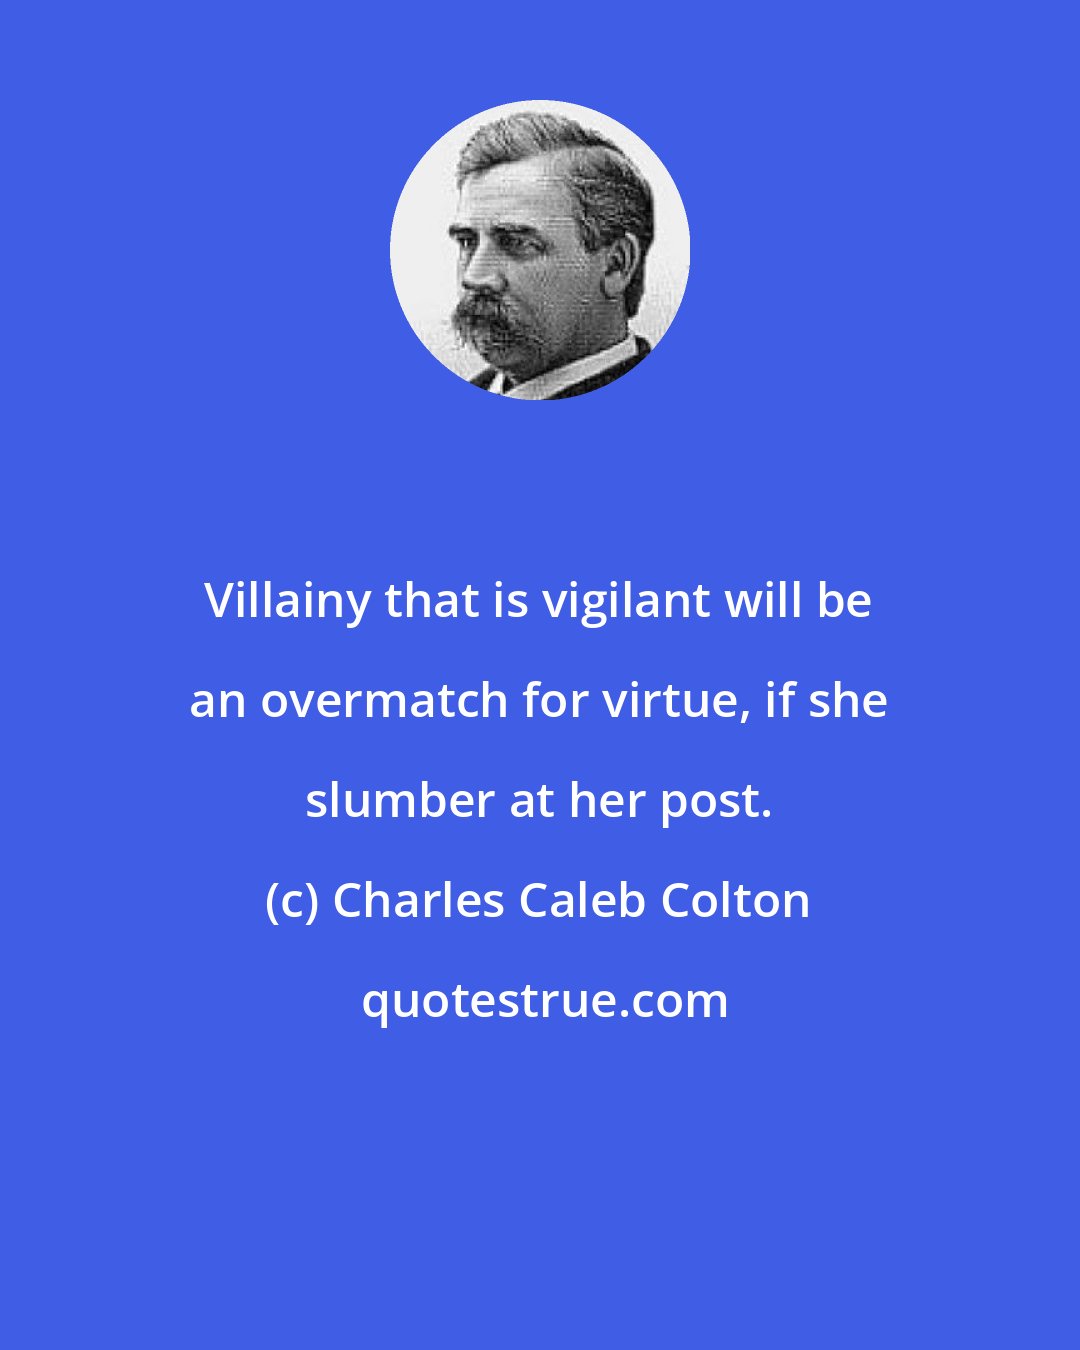 Charles Caleb Colton: Villainy that is vigilant will be an overmatch for virtue, if she slumber at her post.